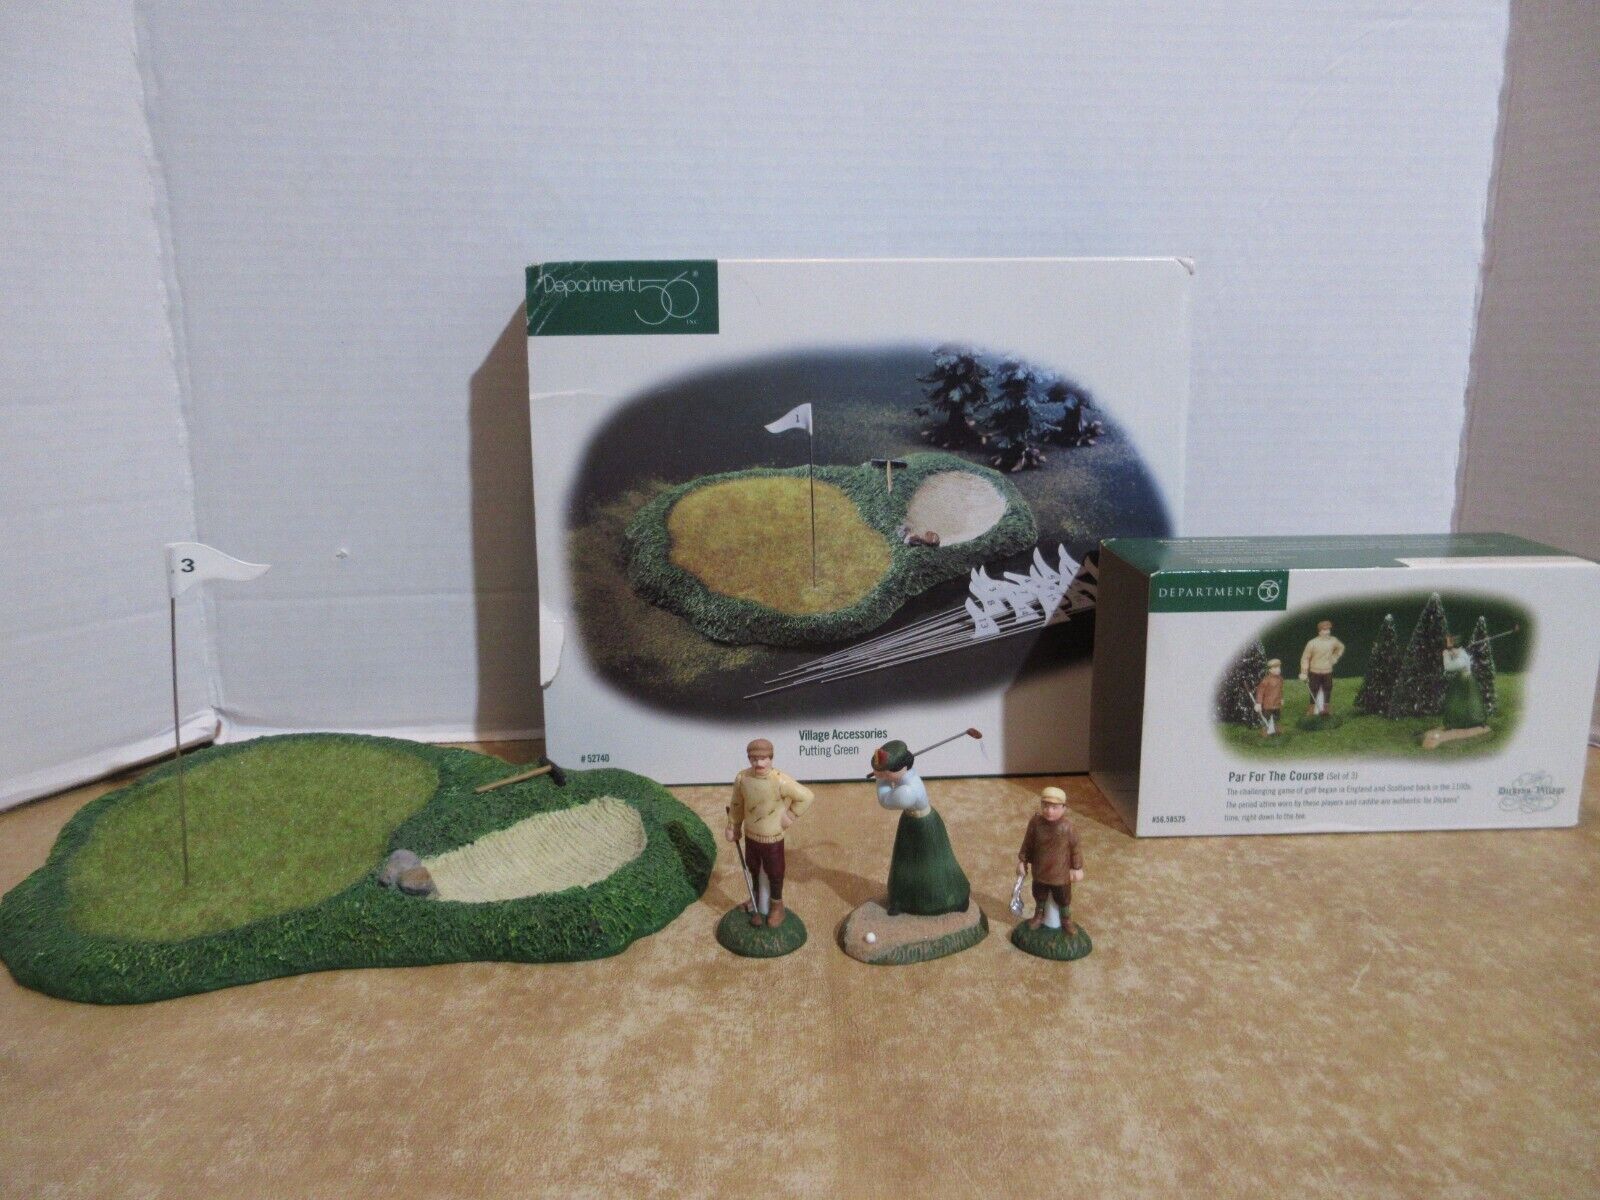 Dept. 56  1996 Putting Green W/Flag & 2000 Par For The Course 3pc. Golfers